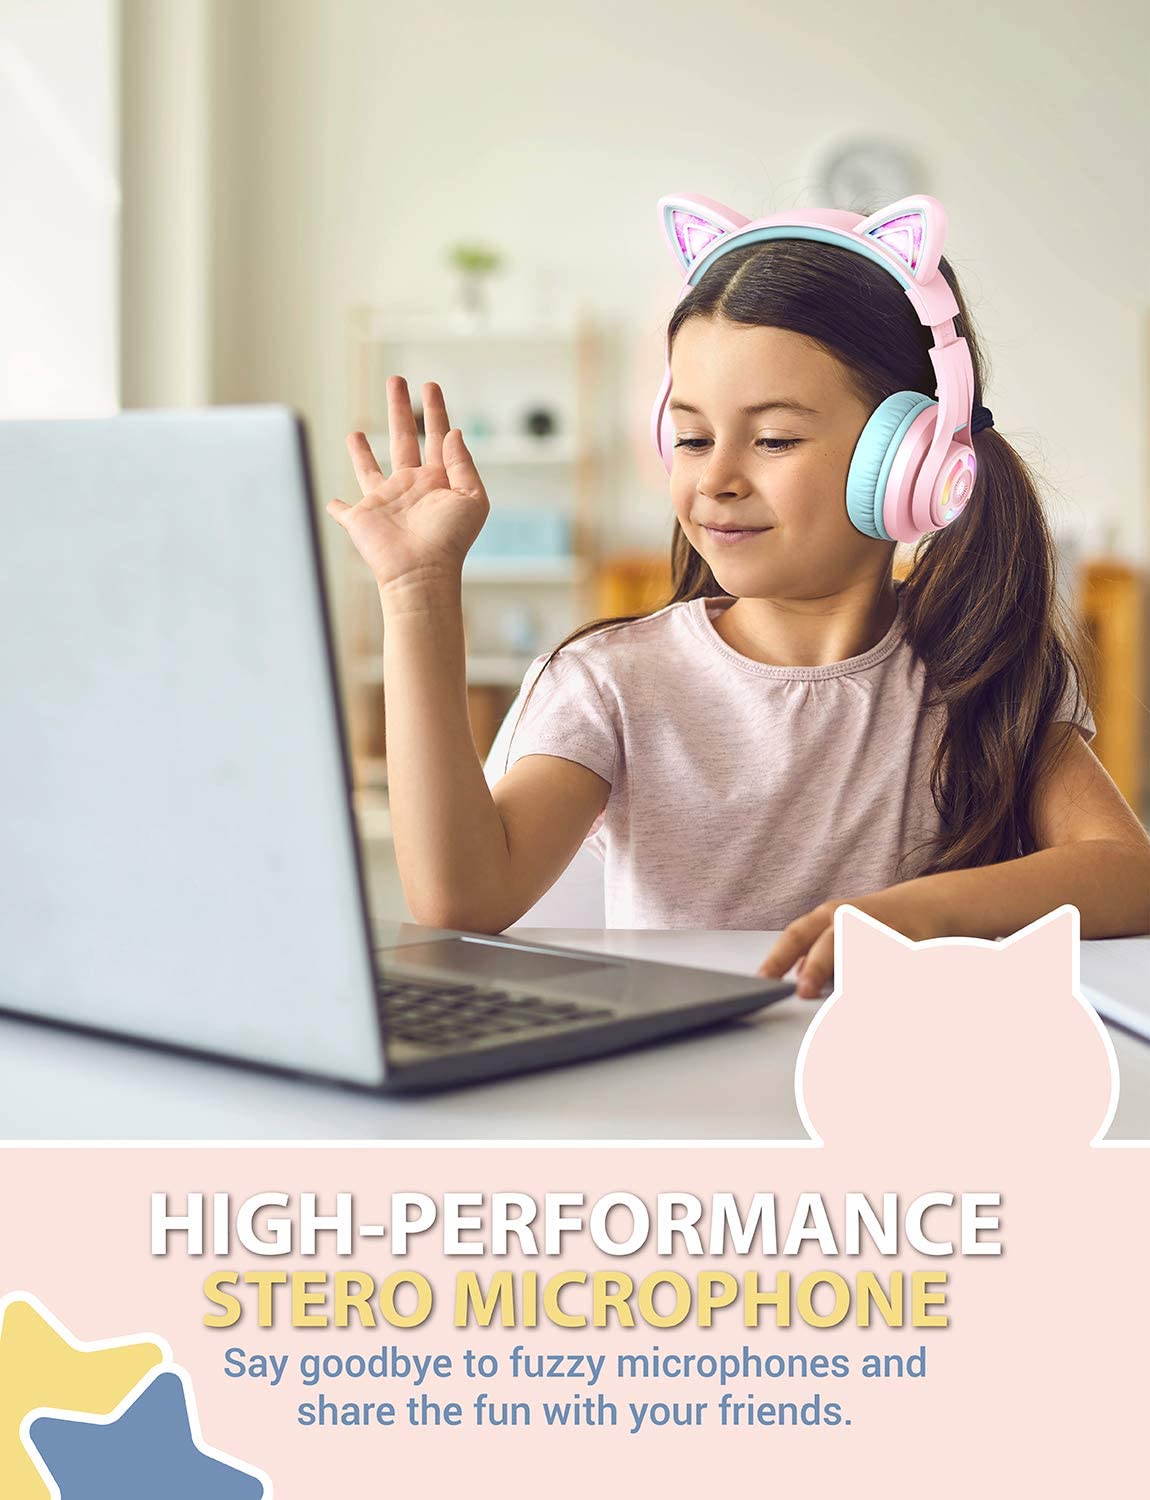 iClever BTH13 Bluetooth 5.0 Headphones with 3 setting Volume Limiter Features and up to 45H Playtime for Kids 3-16yrs old C04-2083N-01